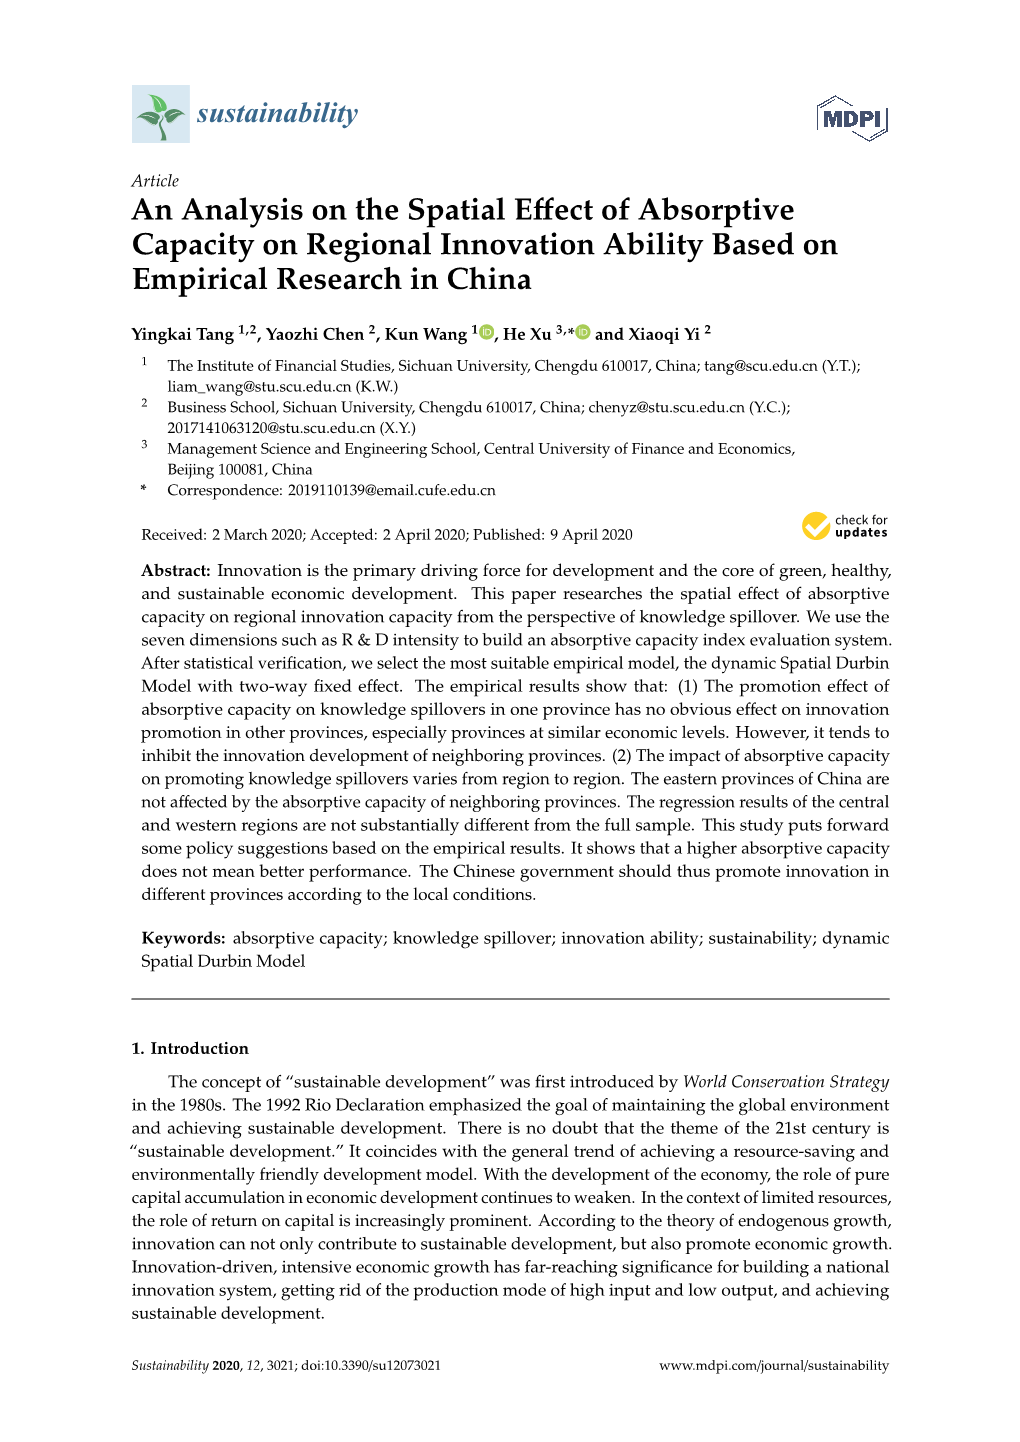 An Analysis on the Spatial Effect of Absorptive Capacity on Regional Innovation Ability Based on Empirical Research in China